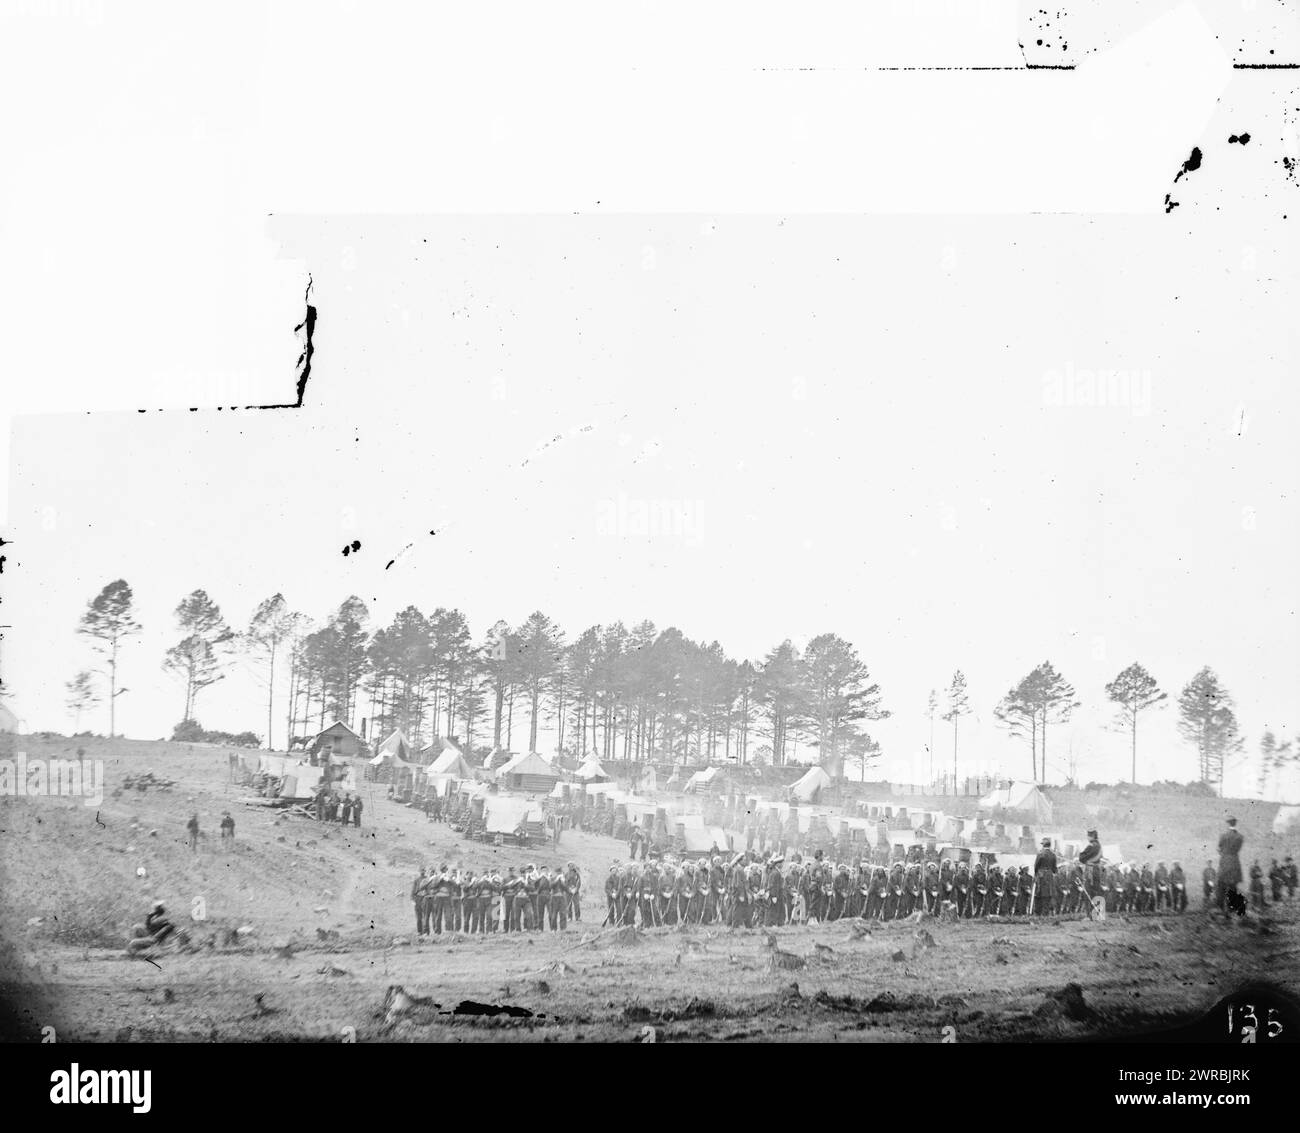 Brandy Station, Virginia. Guard mount of 114th Pennsylvania Infantry. 1st Division, 3rd Corps, O'Sullivan, Timothy H., 1840-1882, photographer, 1864 Apr., United States, History, Civil War, 1861-1865, Glass negatives, 1860-1870., Stereographs, 1860-1870, Glass negatives, 1860-1870, 1 negative (2 plates): glass, stereograph, wet collodion Stock Photo